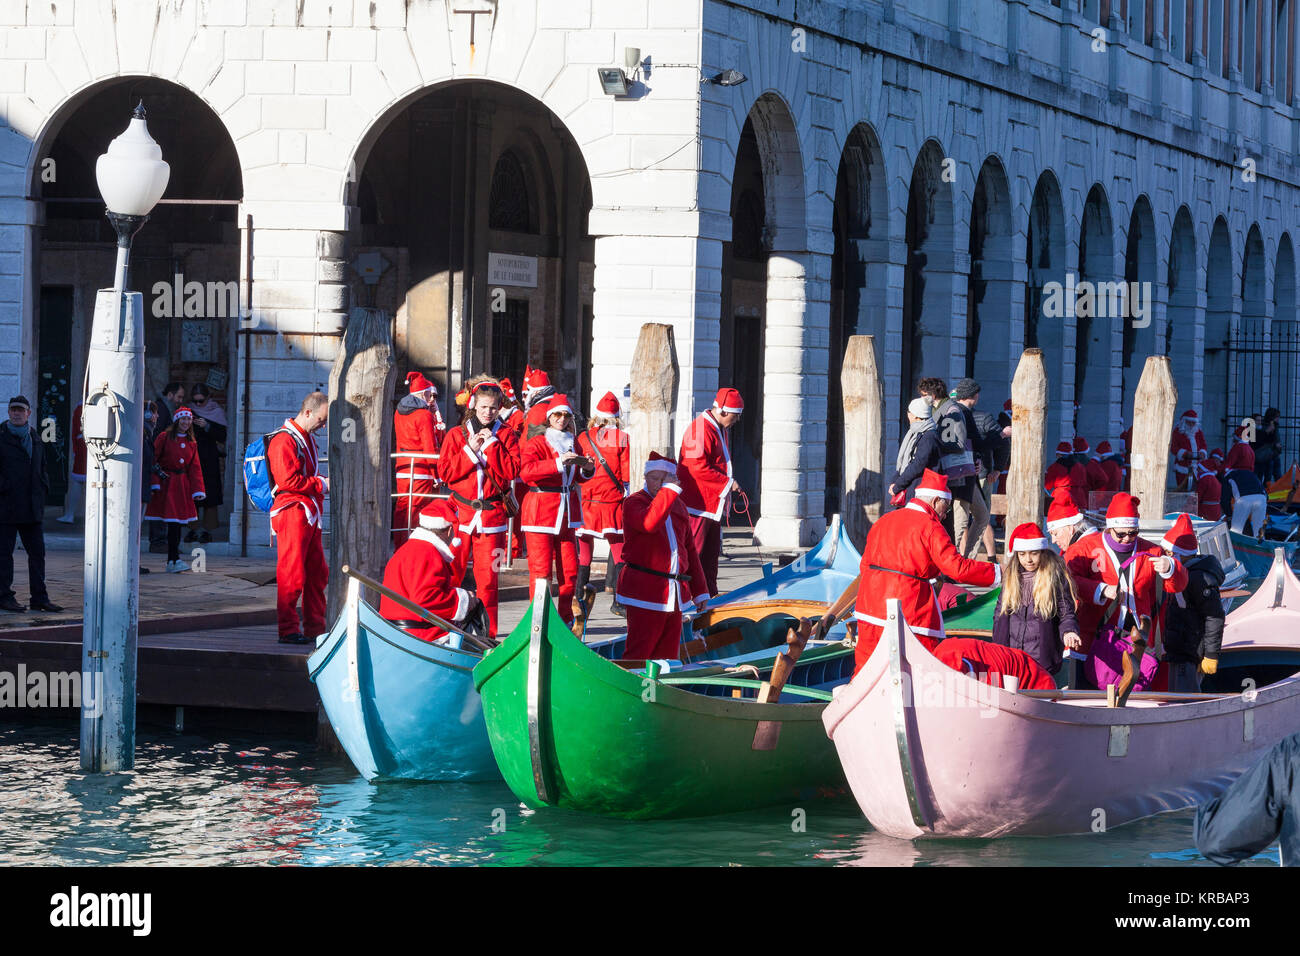 Babbo Natale Italy.Celebrating Christmas In Venice Italy During The Babbo Natale Stock Photo Alamy